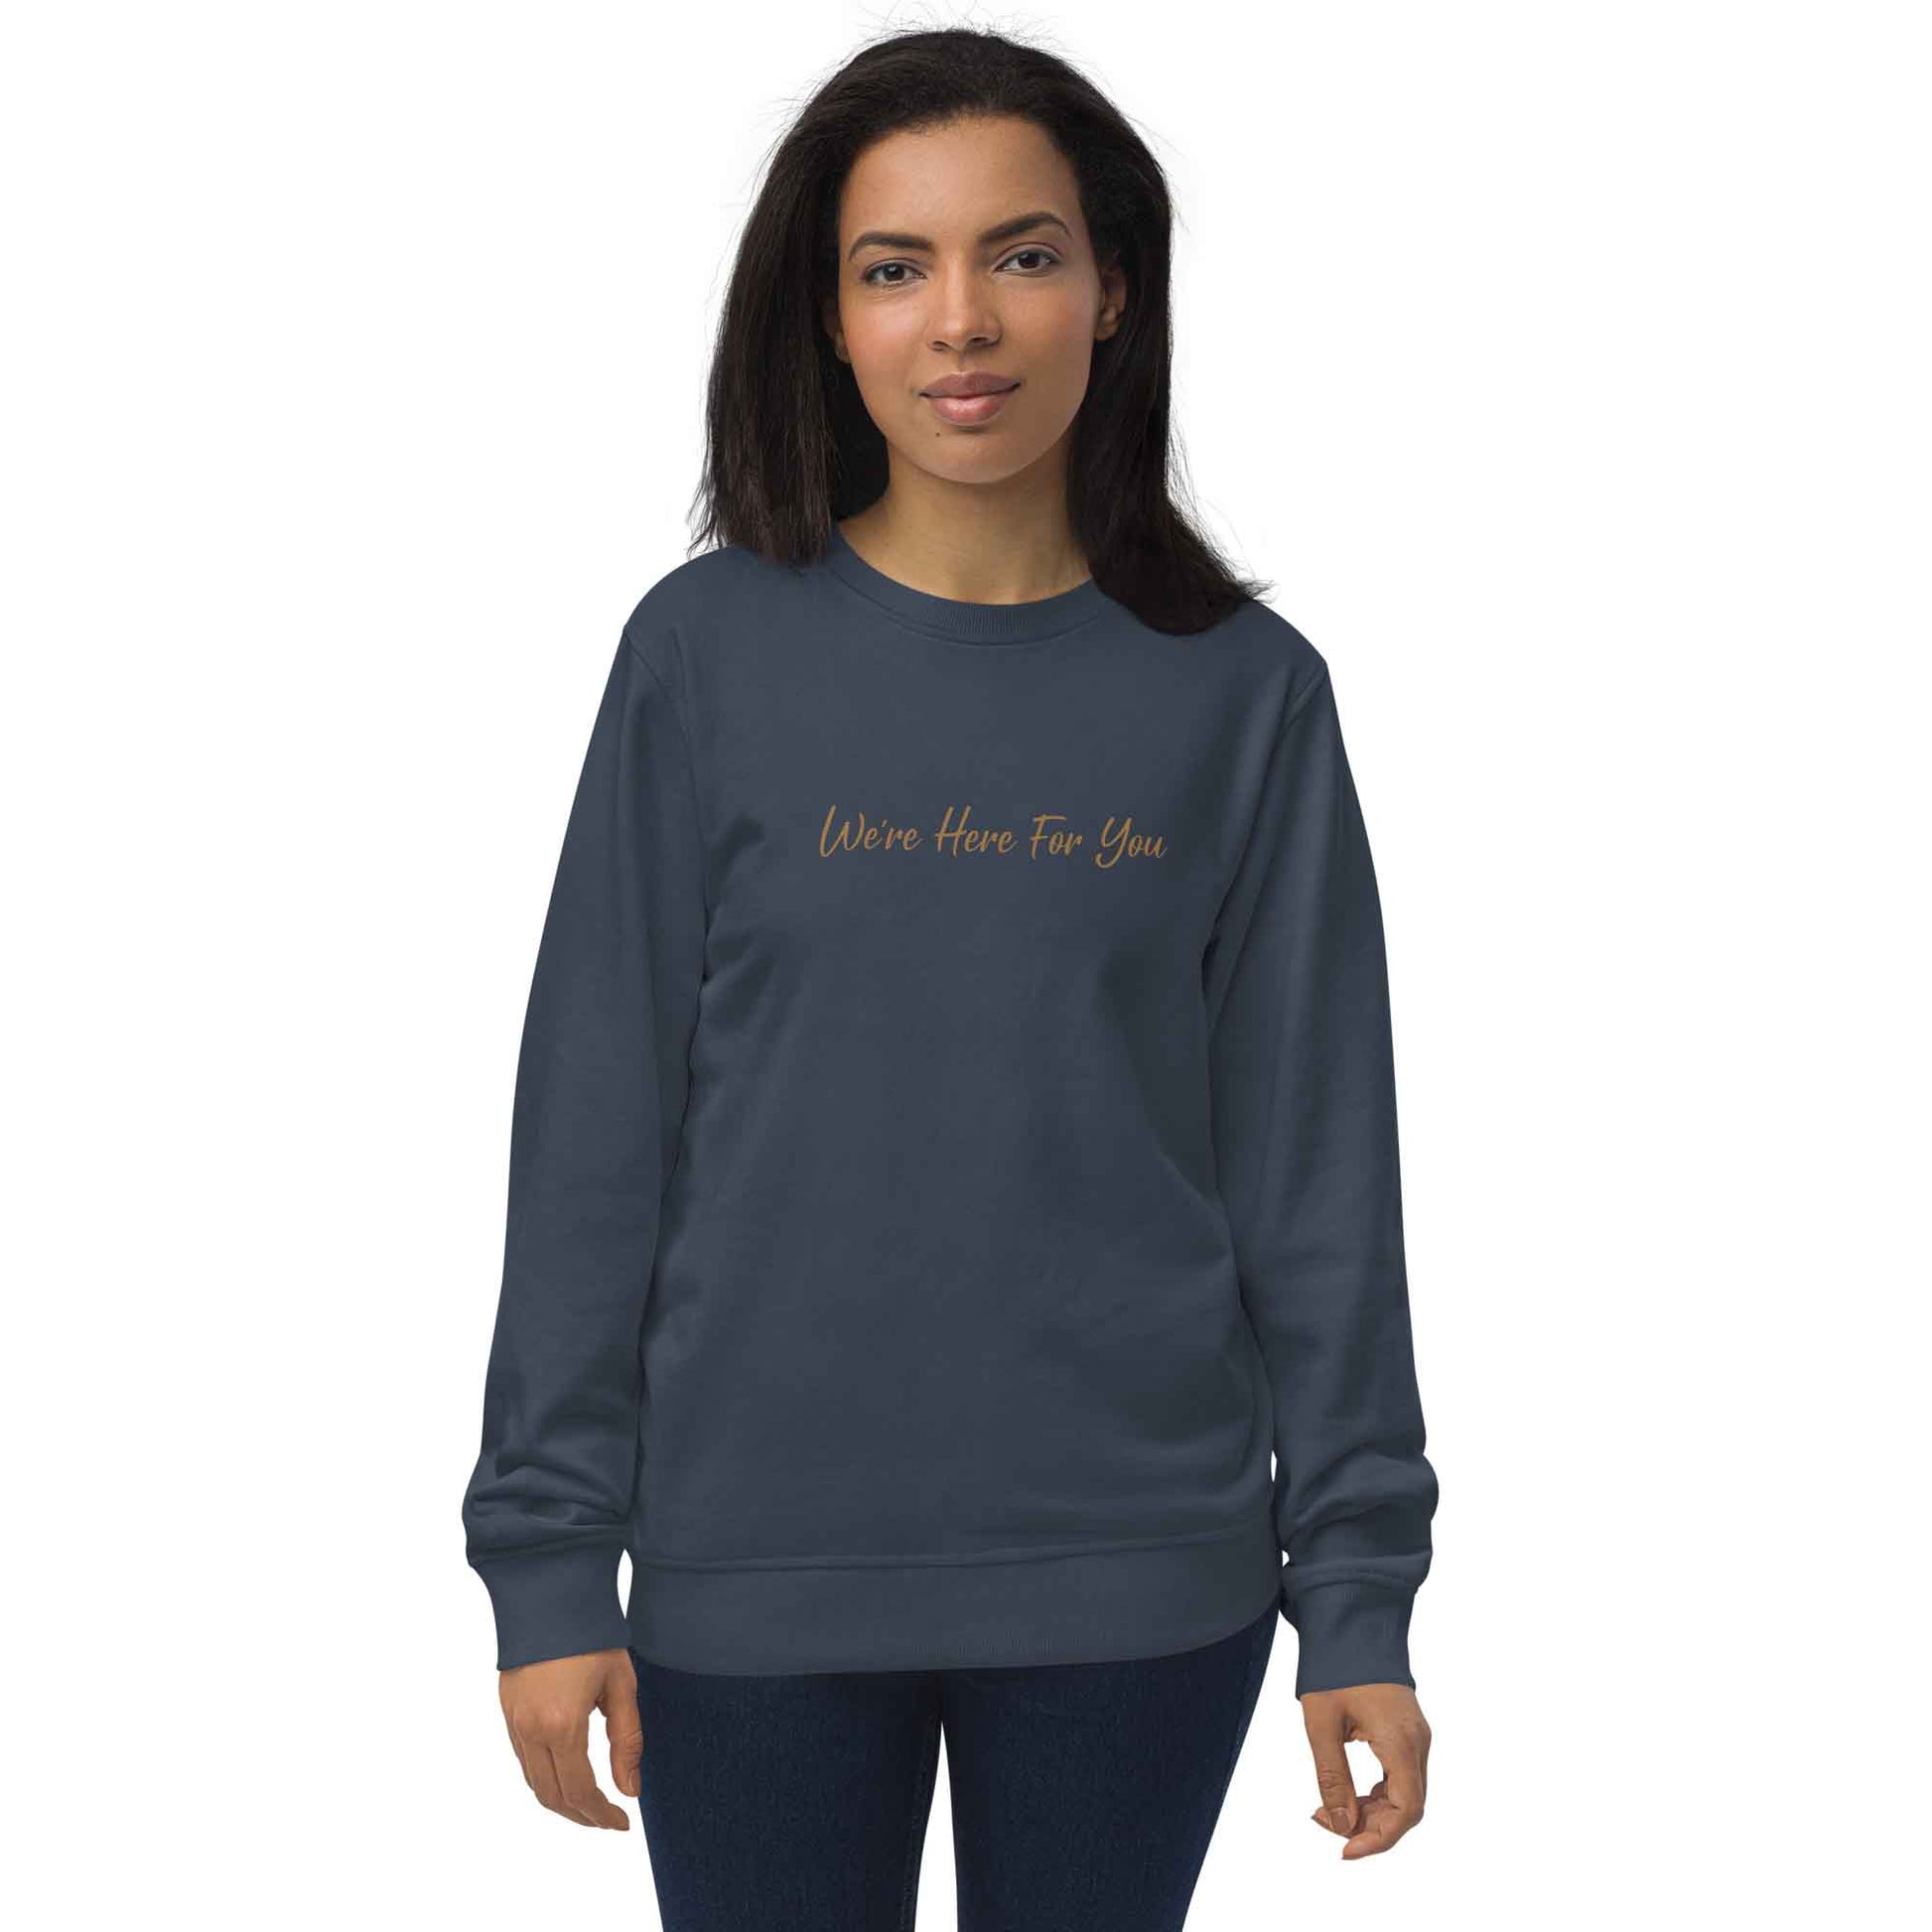 Women navy organic cotton sweatshirt with inspirational quote, "We Are Here For You."